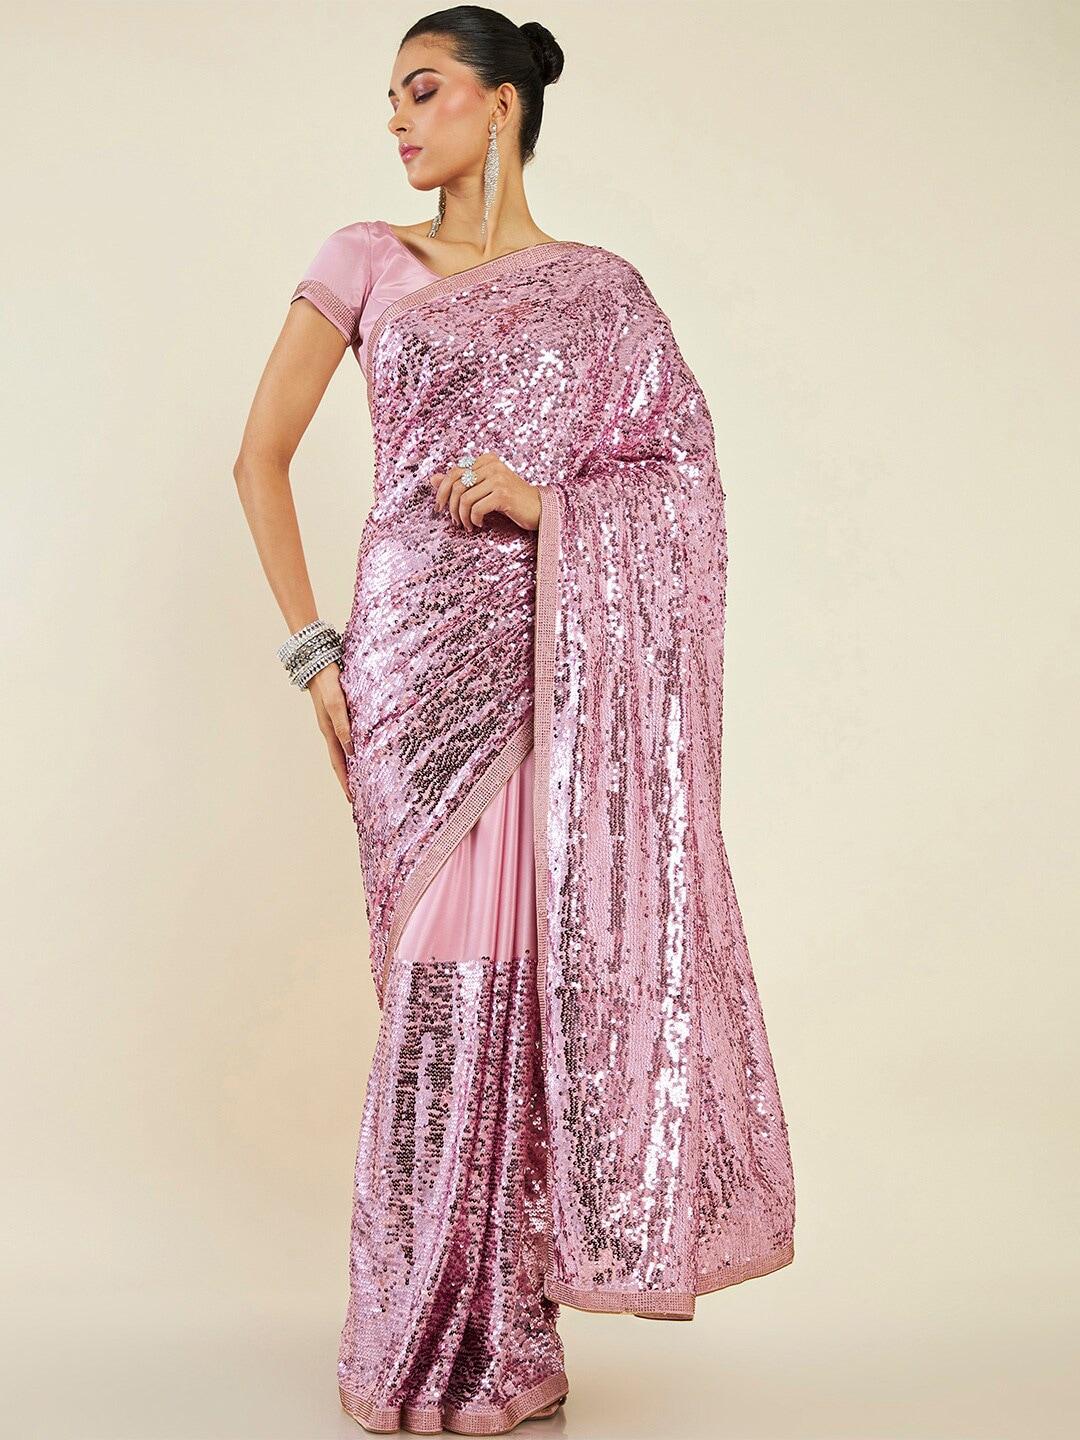 soch sequinned embellished pure crepe saree